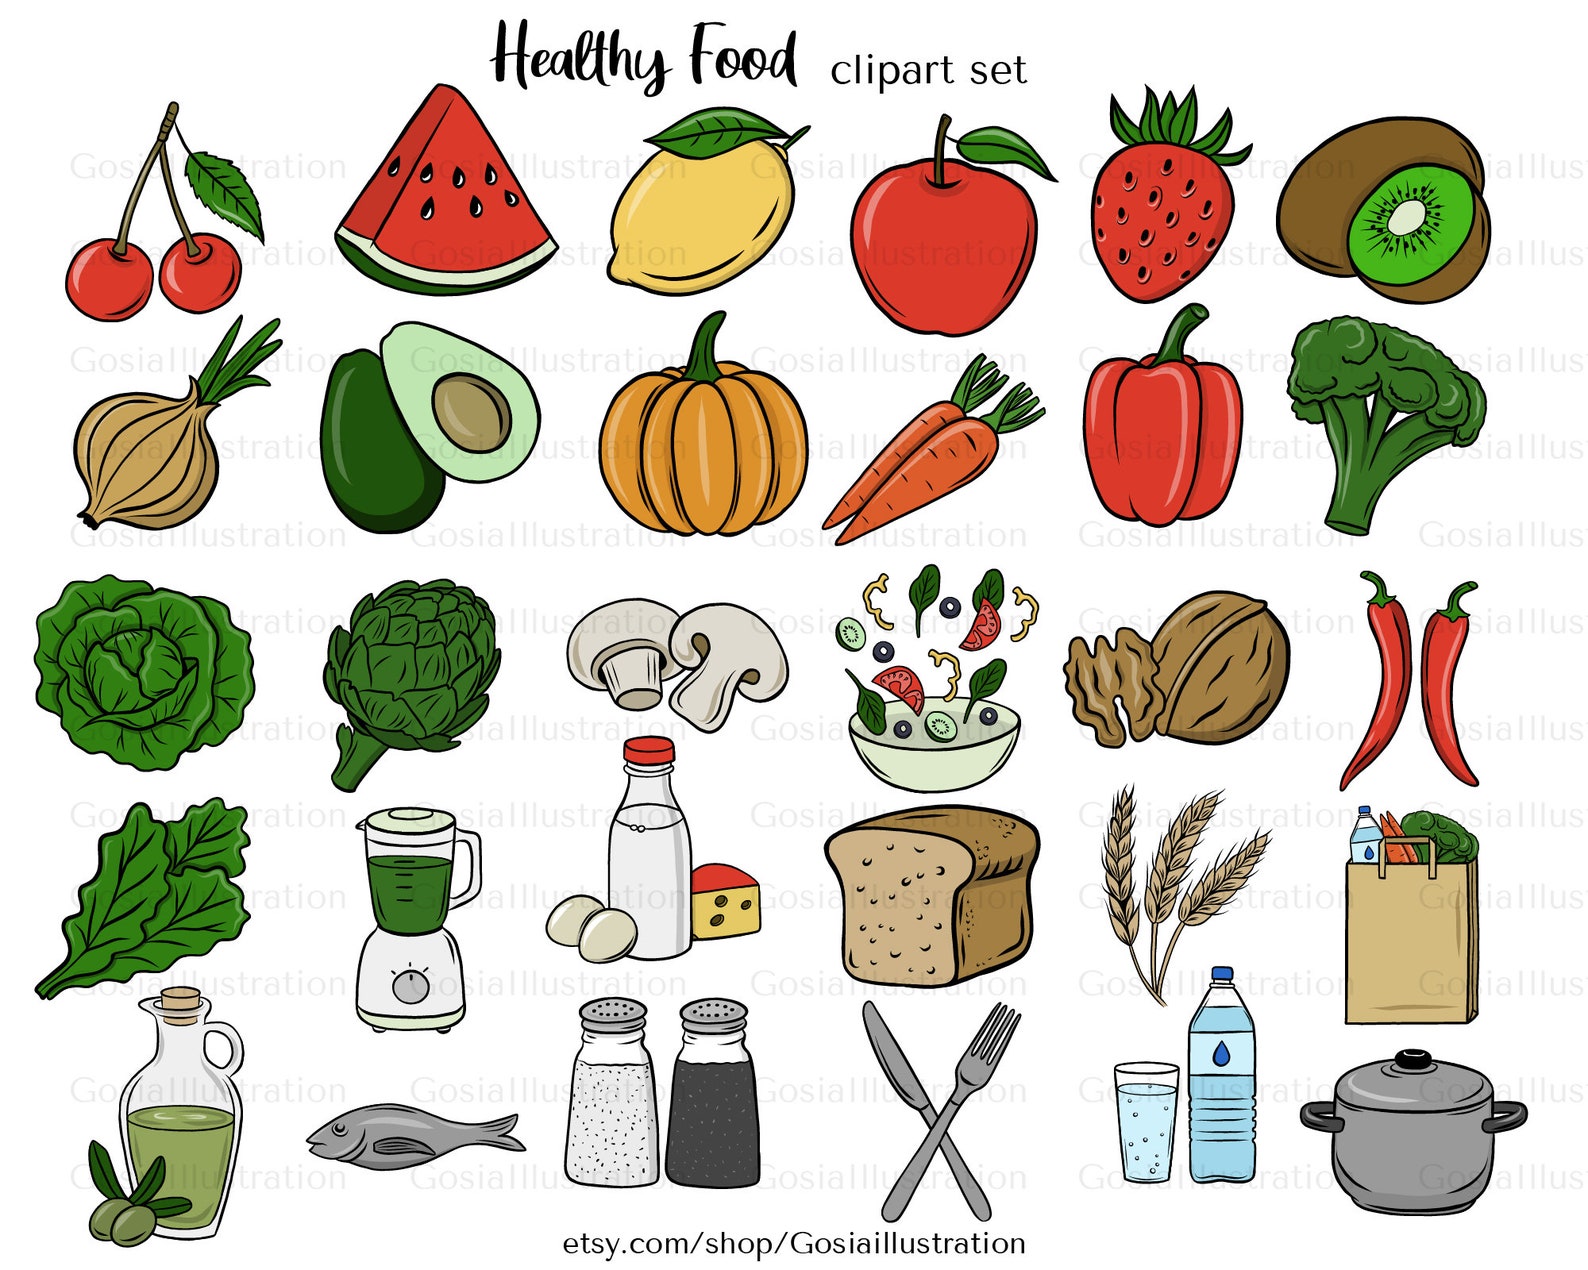 Healthy food clipart set hand drawn food clipart Fruits and | Etsy